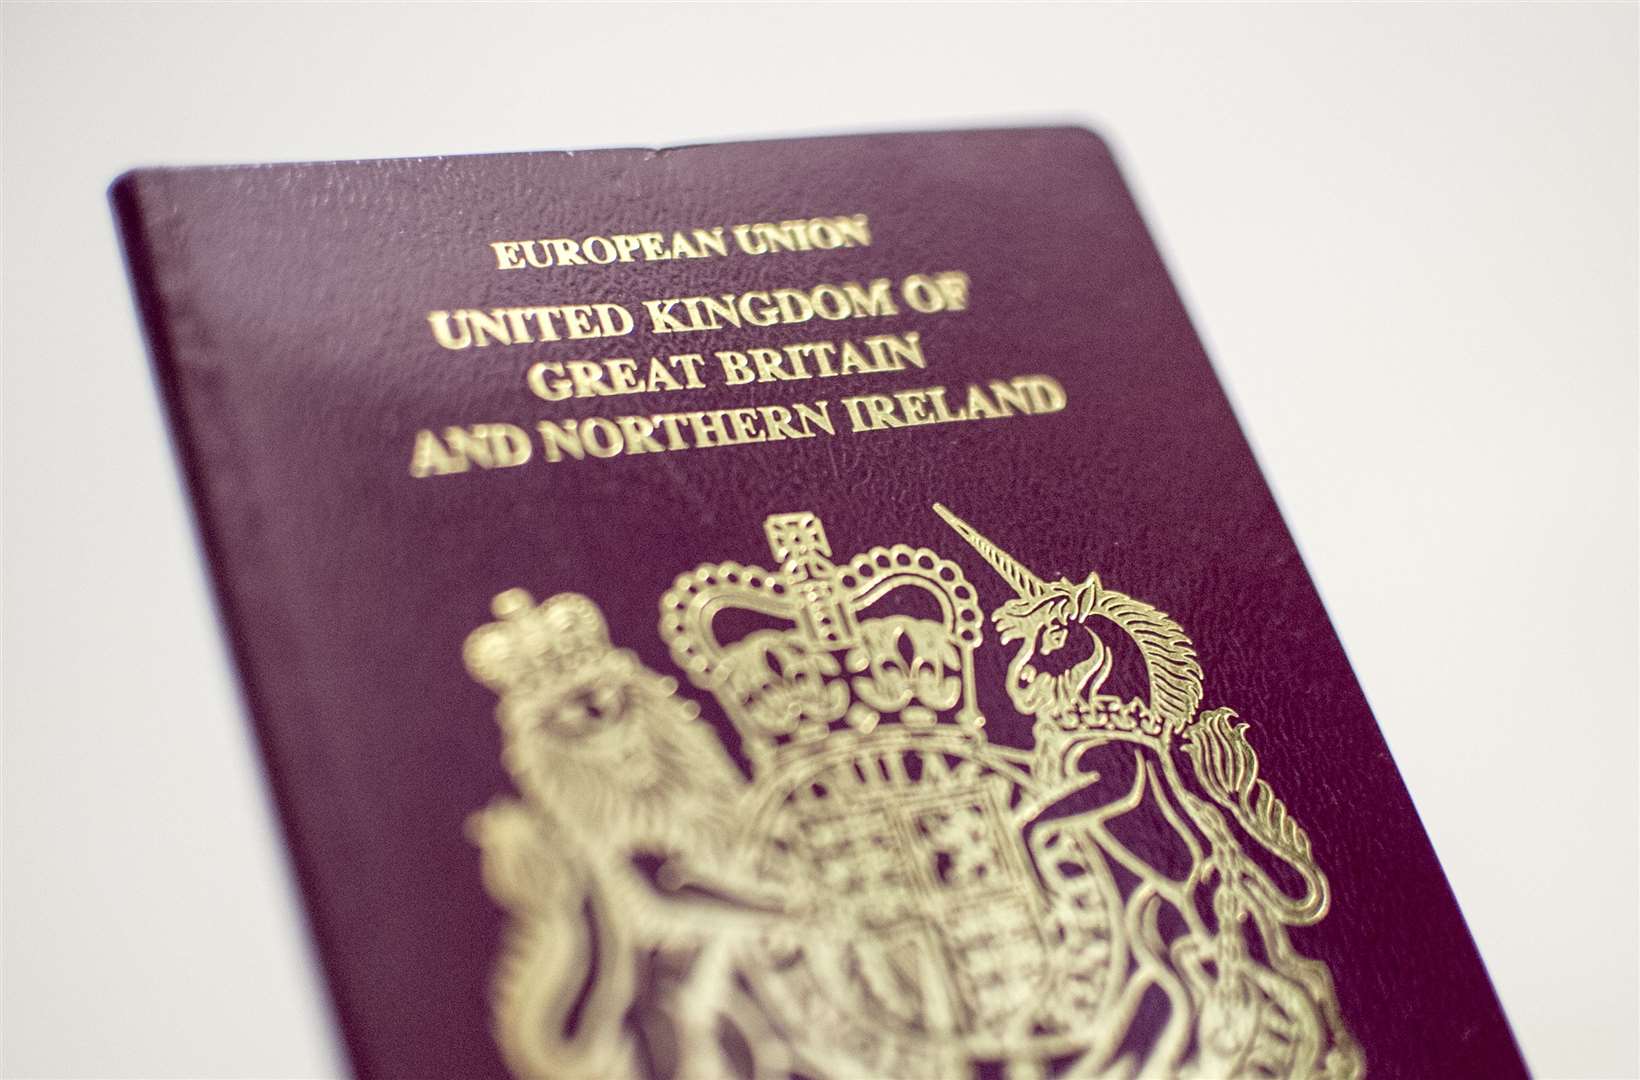 If you're looking to get a new passport then you may be waiting a long time - so why not holiday in Kent this summer?